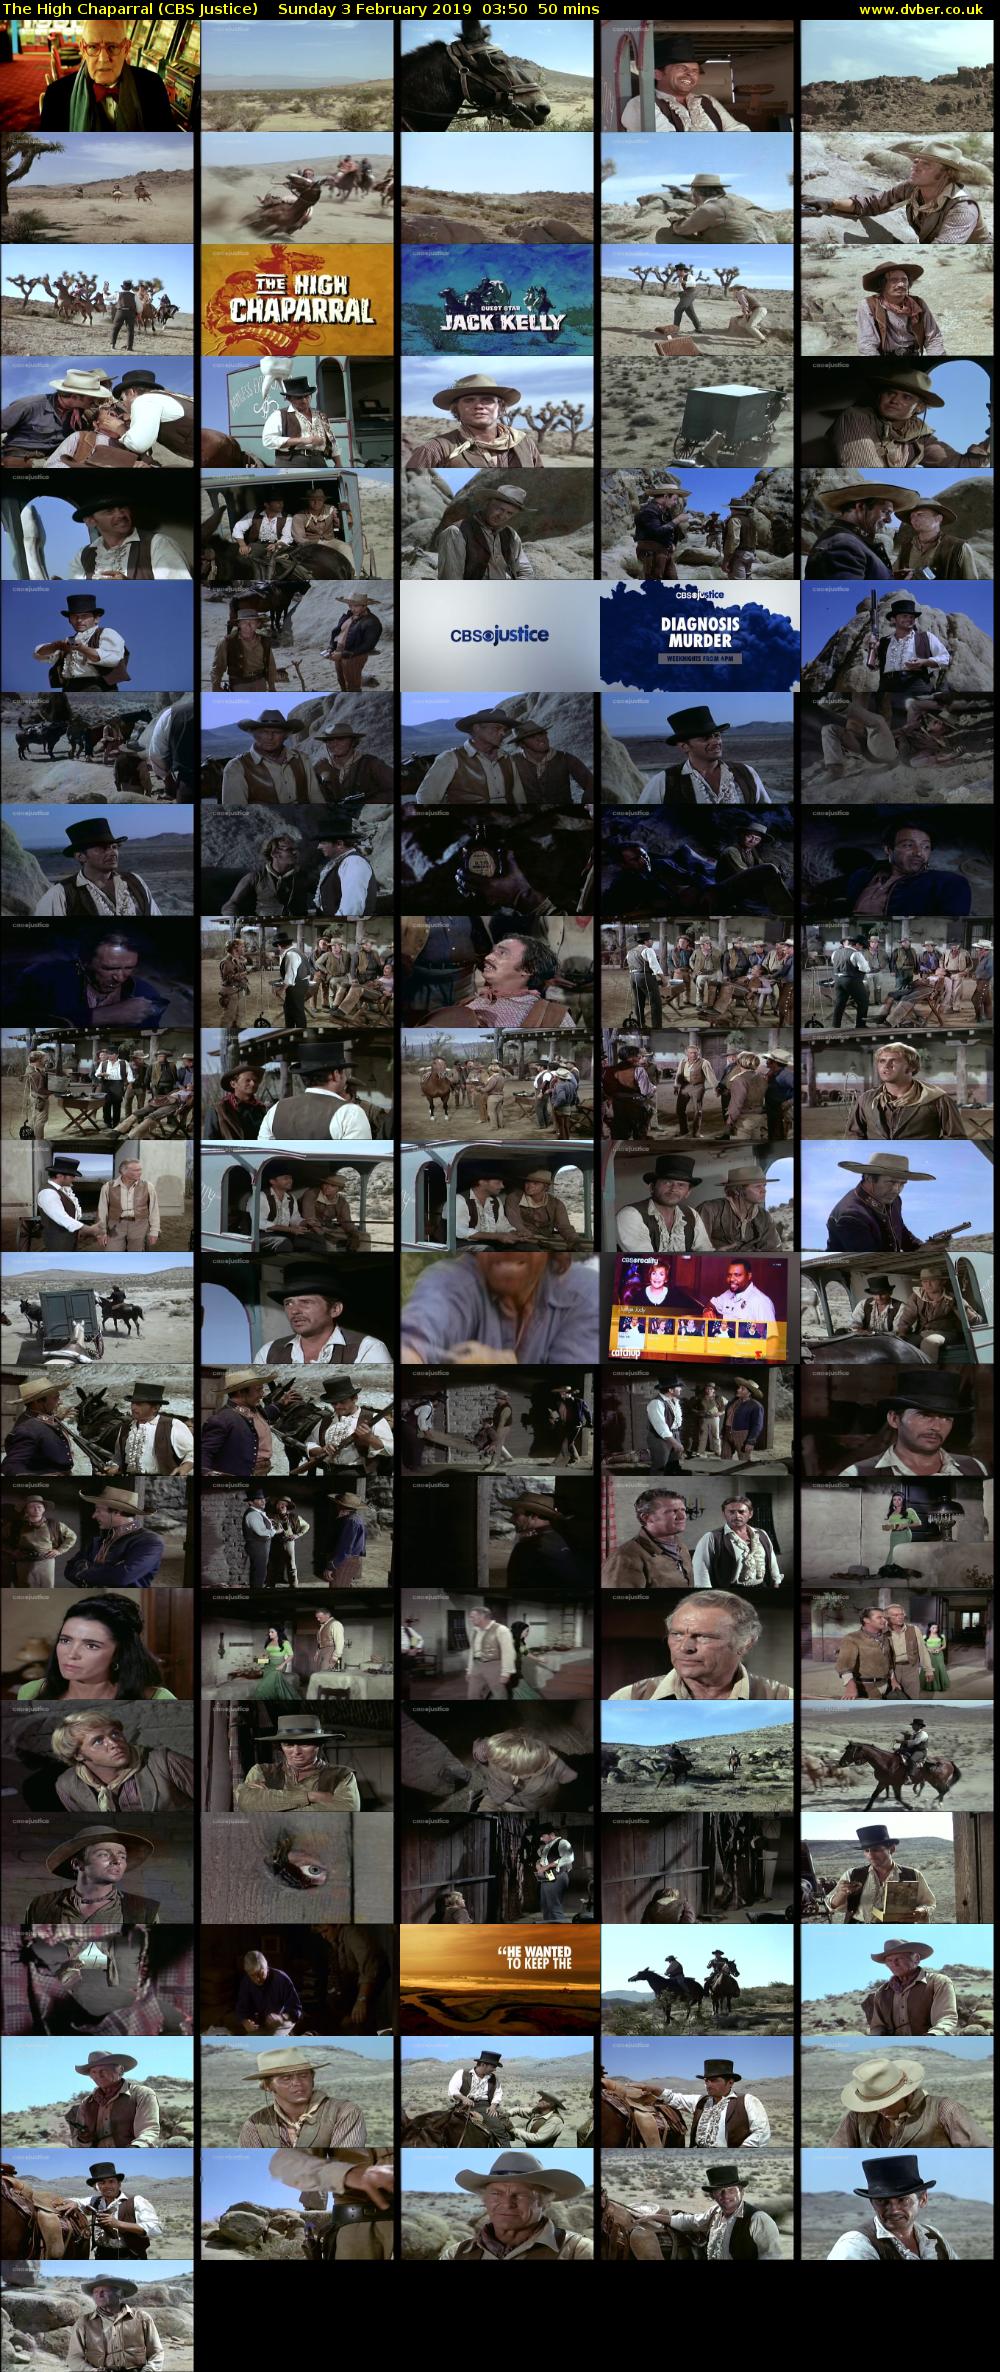 The High Chaparral (CBS Justice) Sunday 3 February 2019 03:50 - 04:40